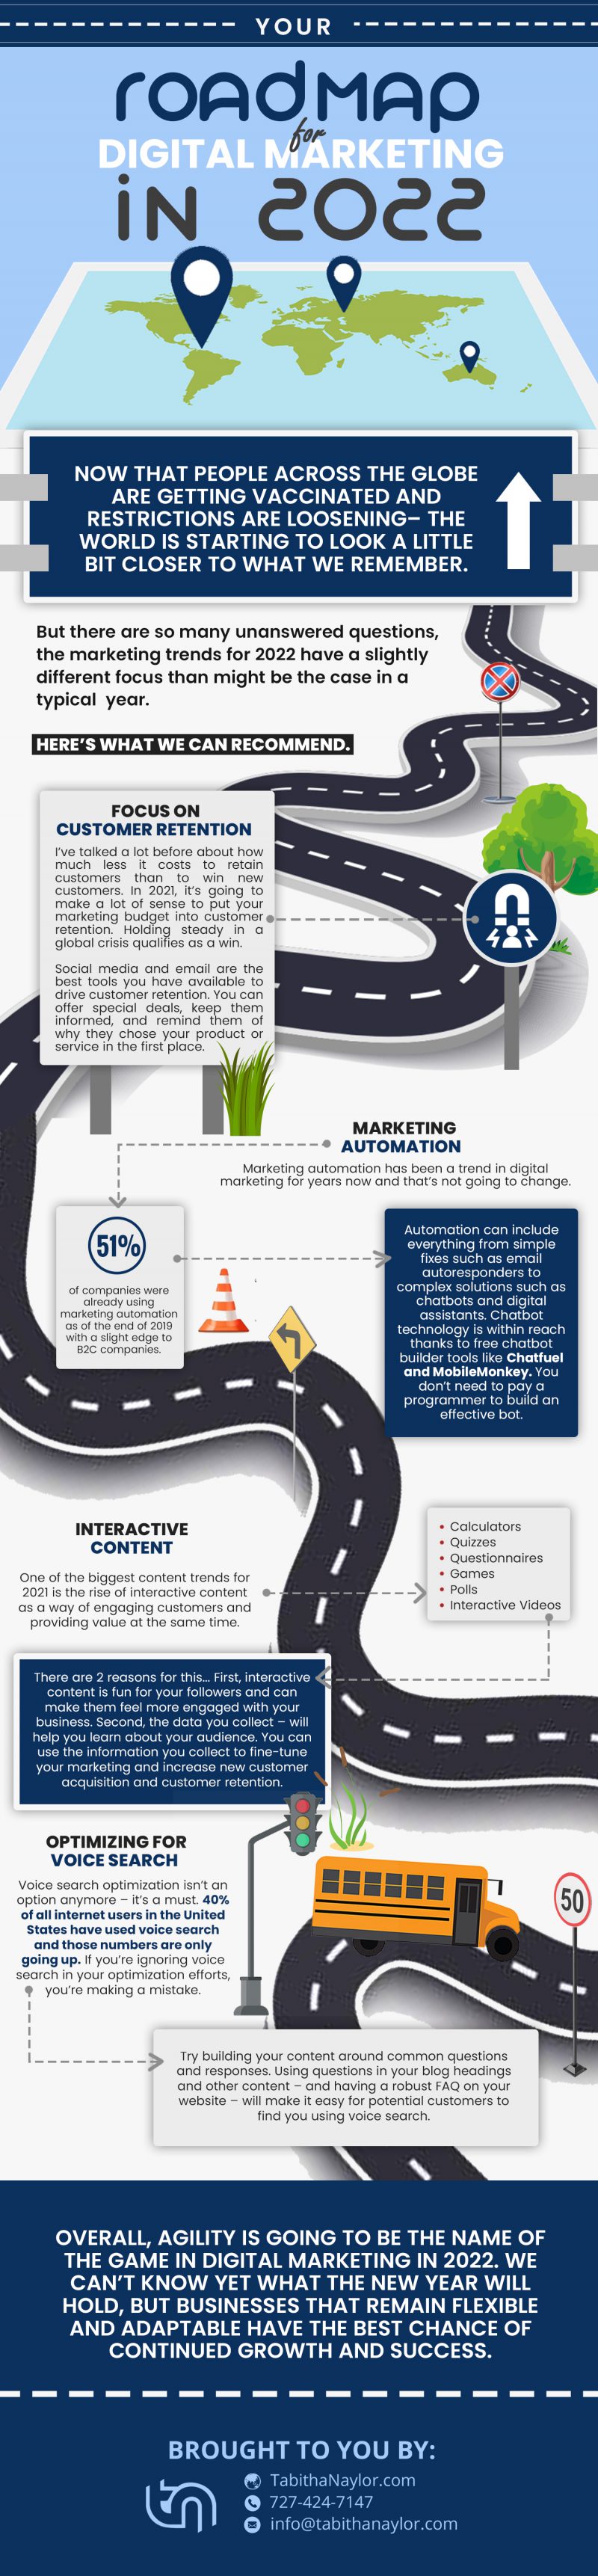 Your-Roadmap-for-Digital-Marketing-in-2022-800x3445 